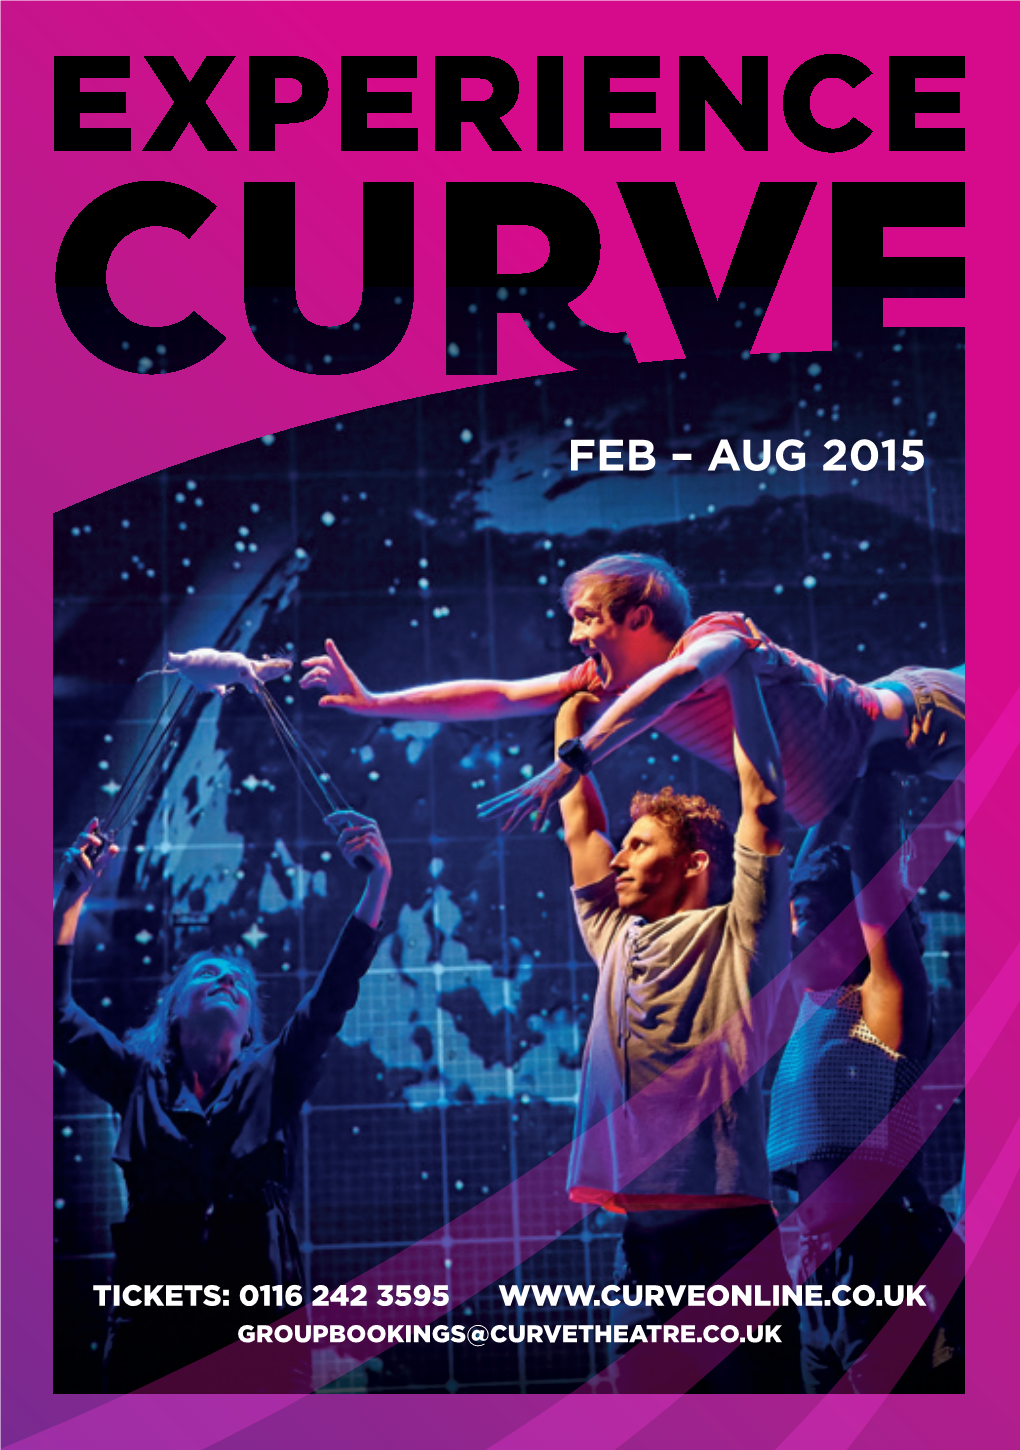 AUG 2015 0116 242 3595 to Book for Your School Group, Please Contact the Ticket Office on BOOKINGS SCHOOL Or Email Groupbookings@Curvetheatre.Co.Uk